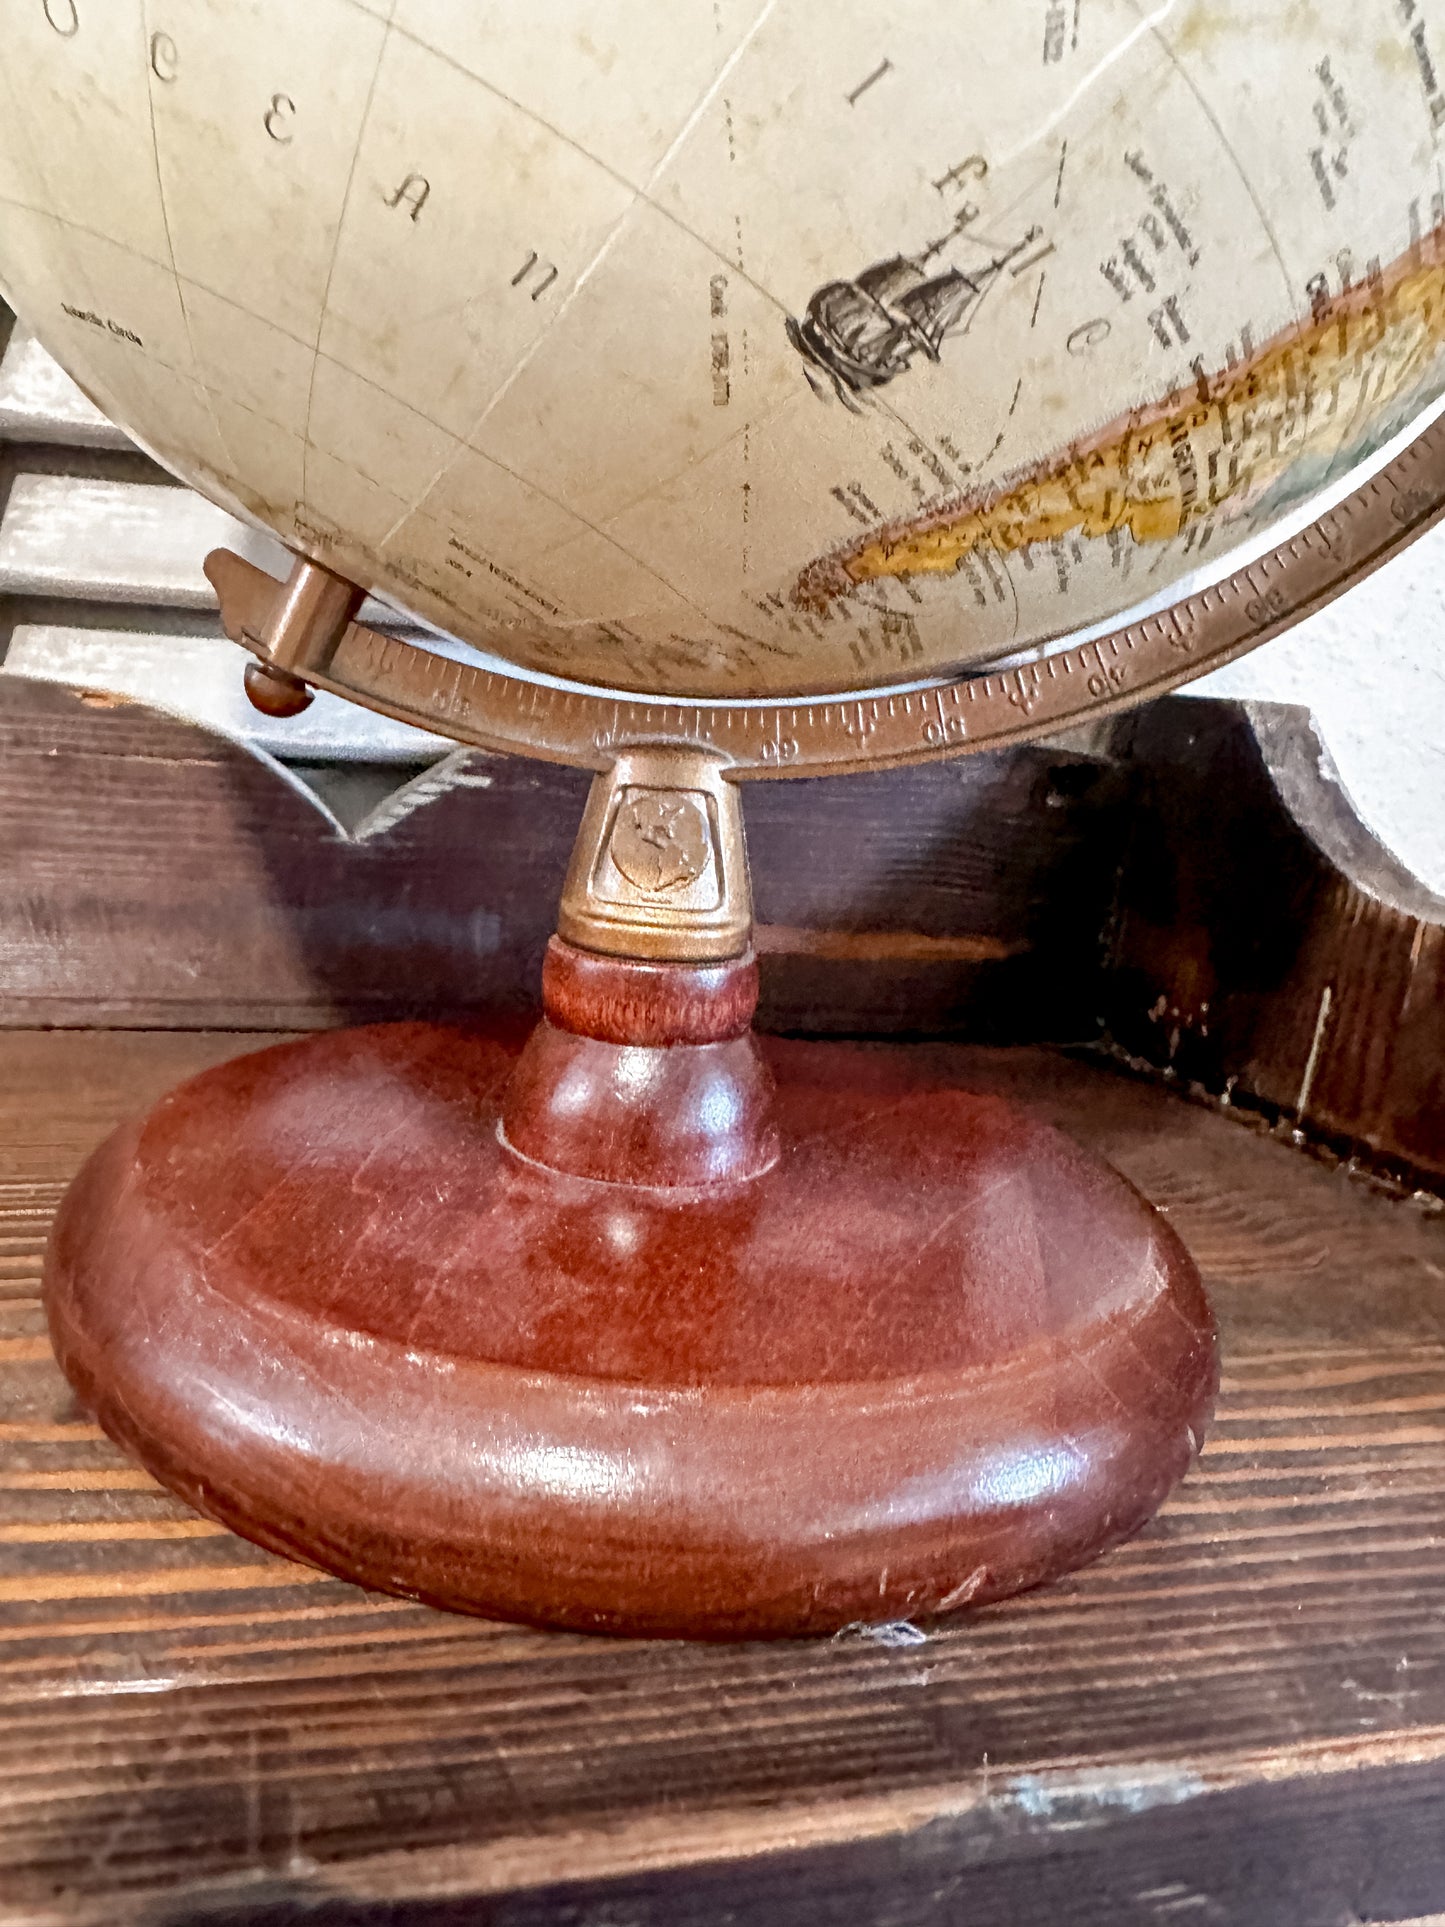 Vintage Replogle Globe (smaller/medium size) and solid wood stand